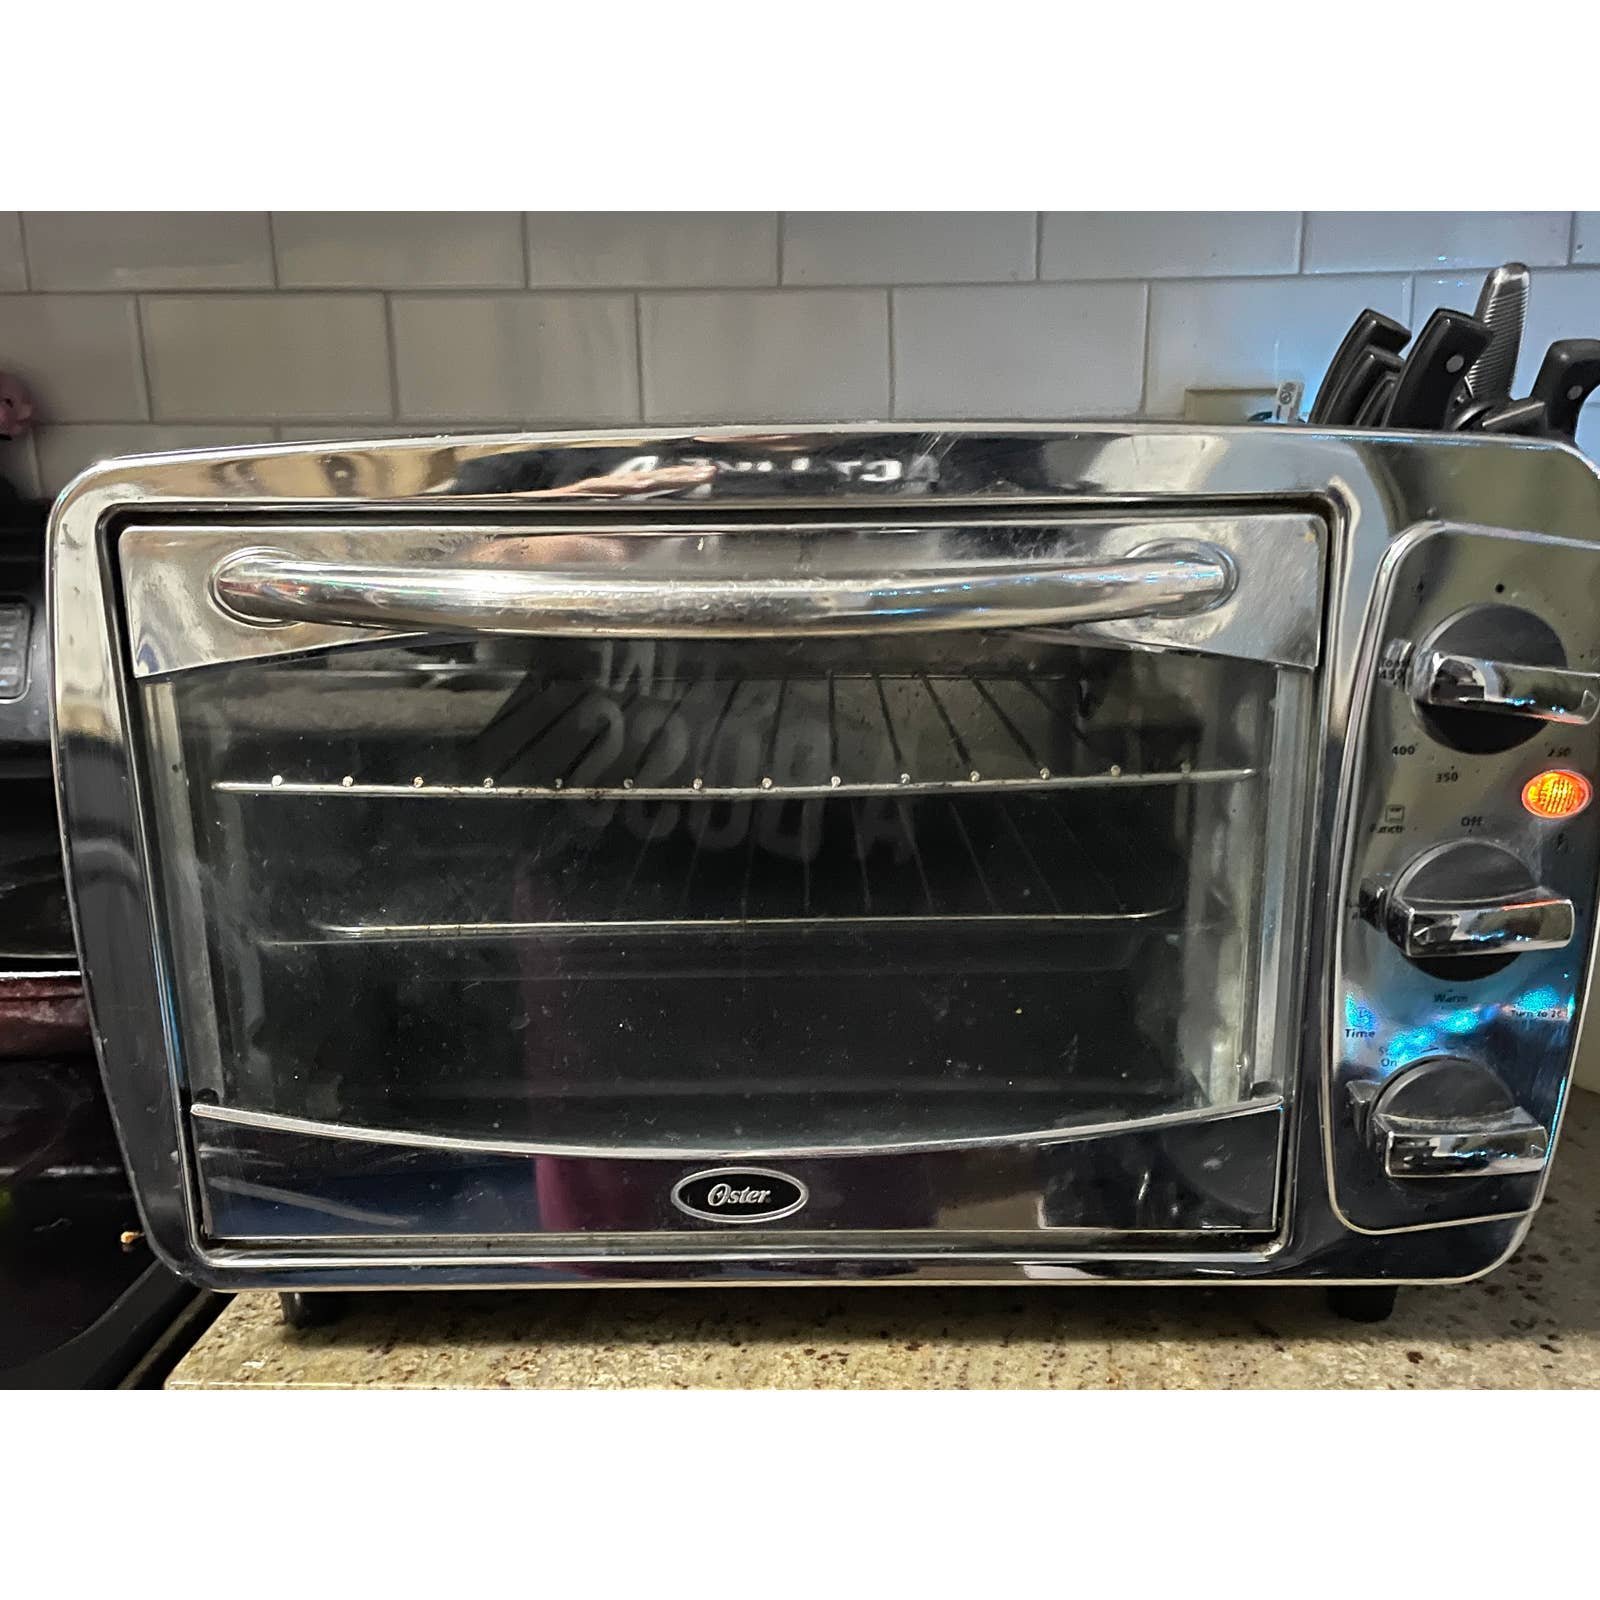 Oster Versatile Countertop Toaster Oven 1400W Chrome TS